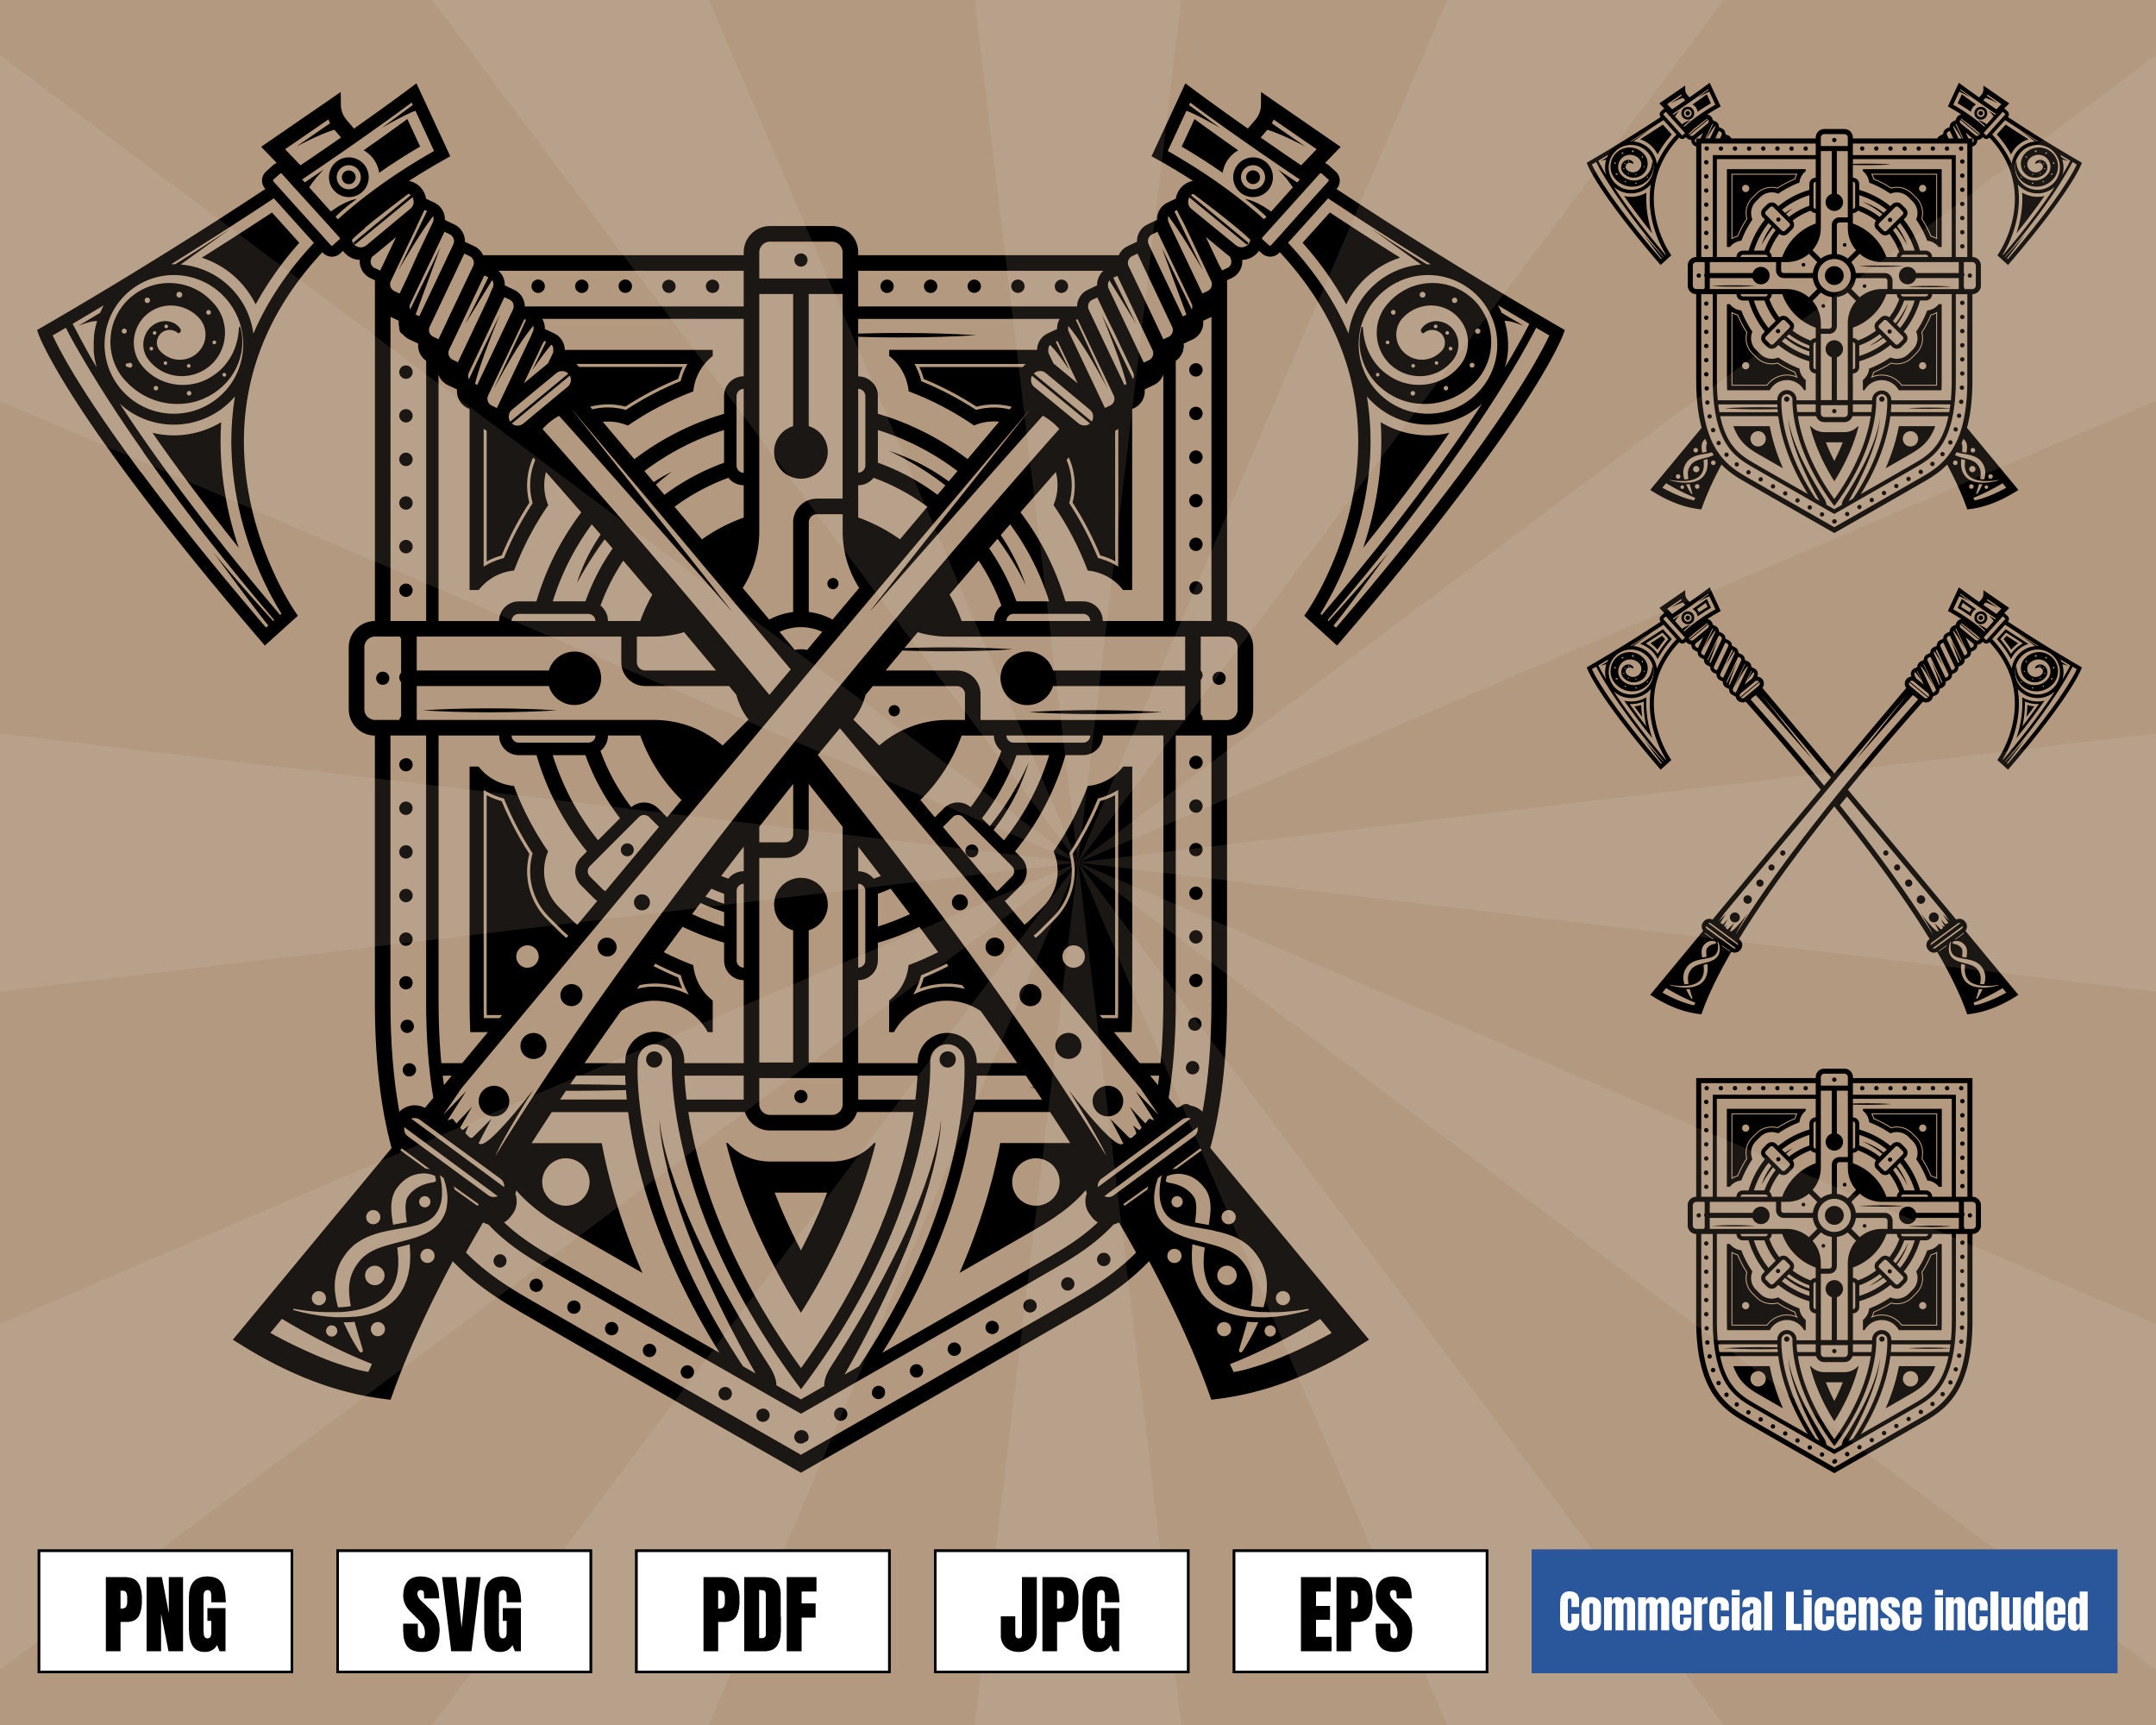 Viking Shield and Axes Coat of Arms Norse Tattoo Art Logo .svg | Etsy